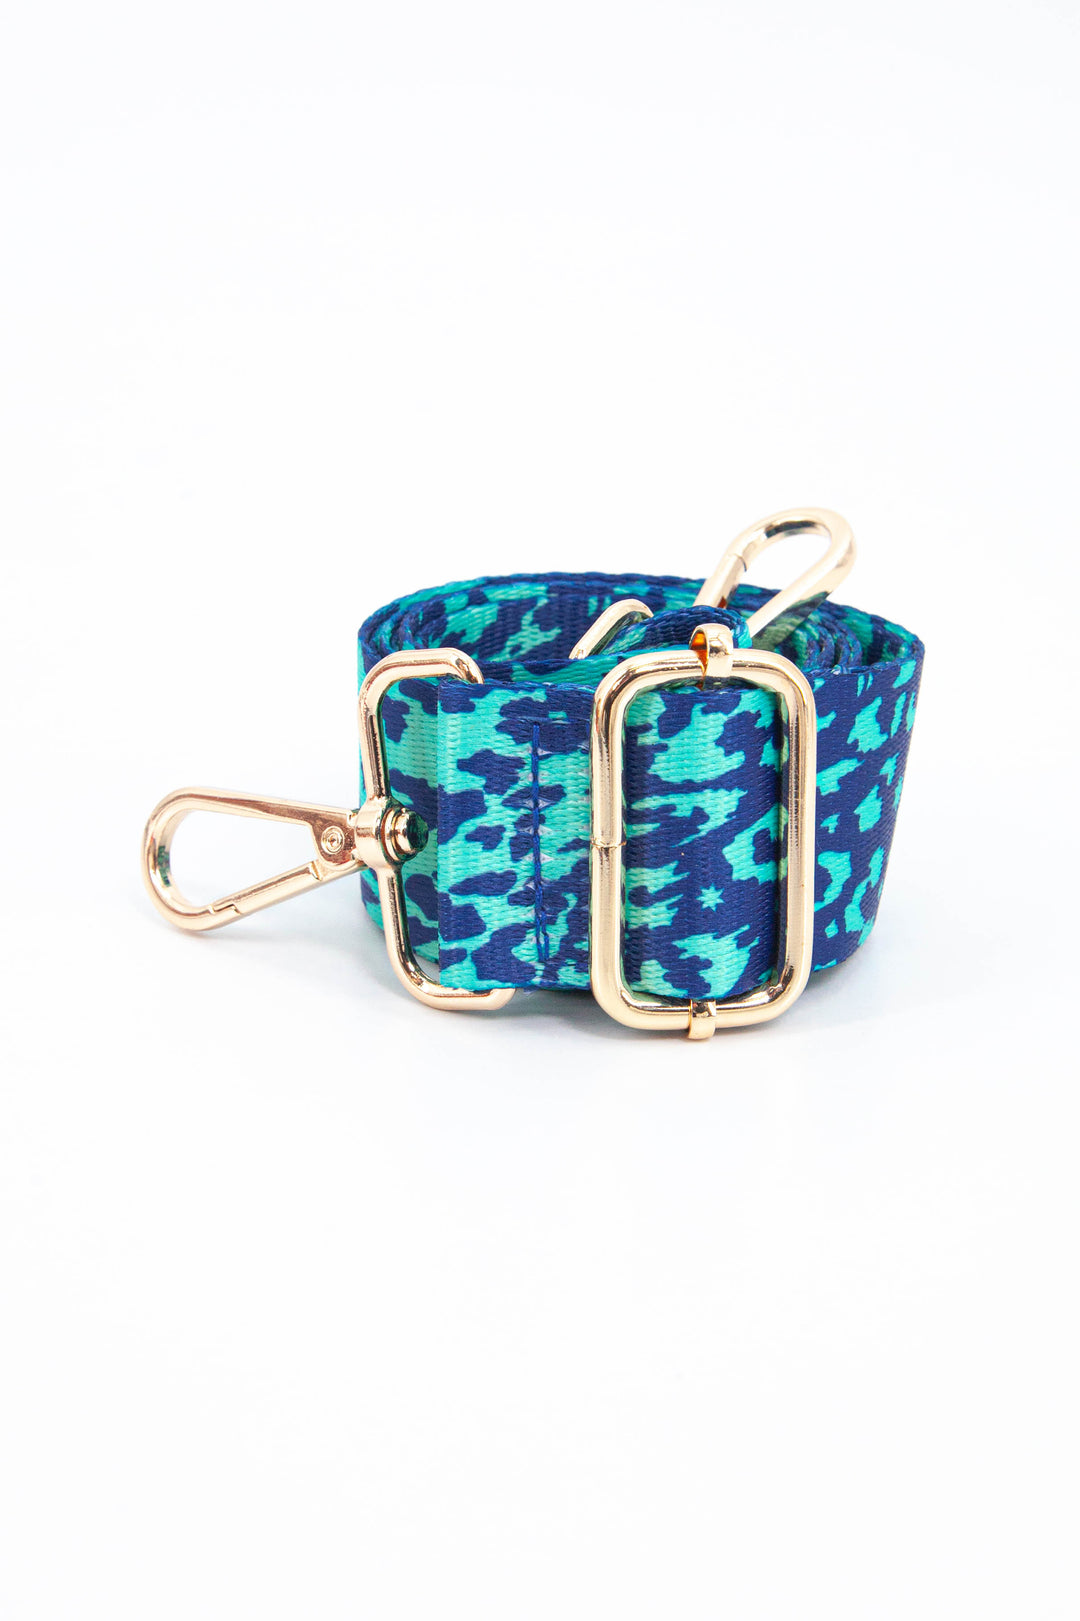 Two Tone Animal and Mini Star Print Bag Strap in Blue & Green